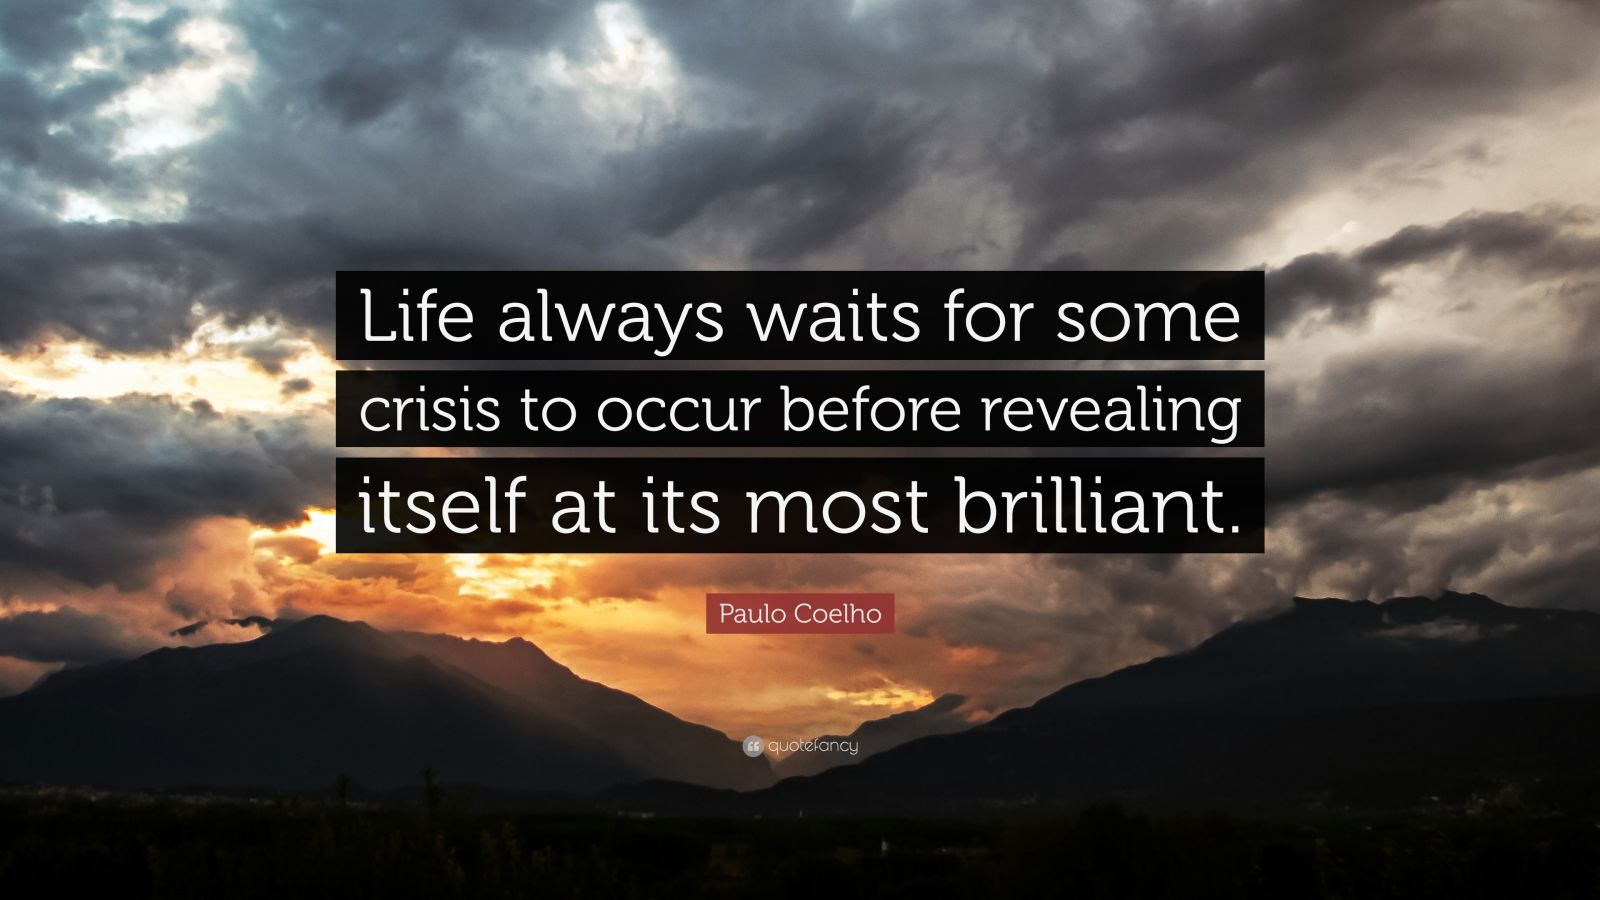 Paulo Coelho Quote “Life always waits for some crisis to occur before revealing itself